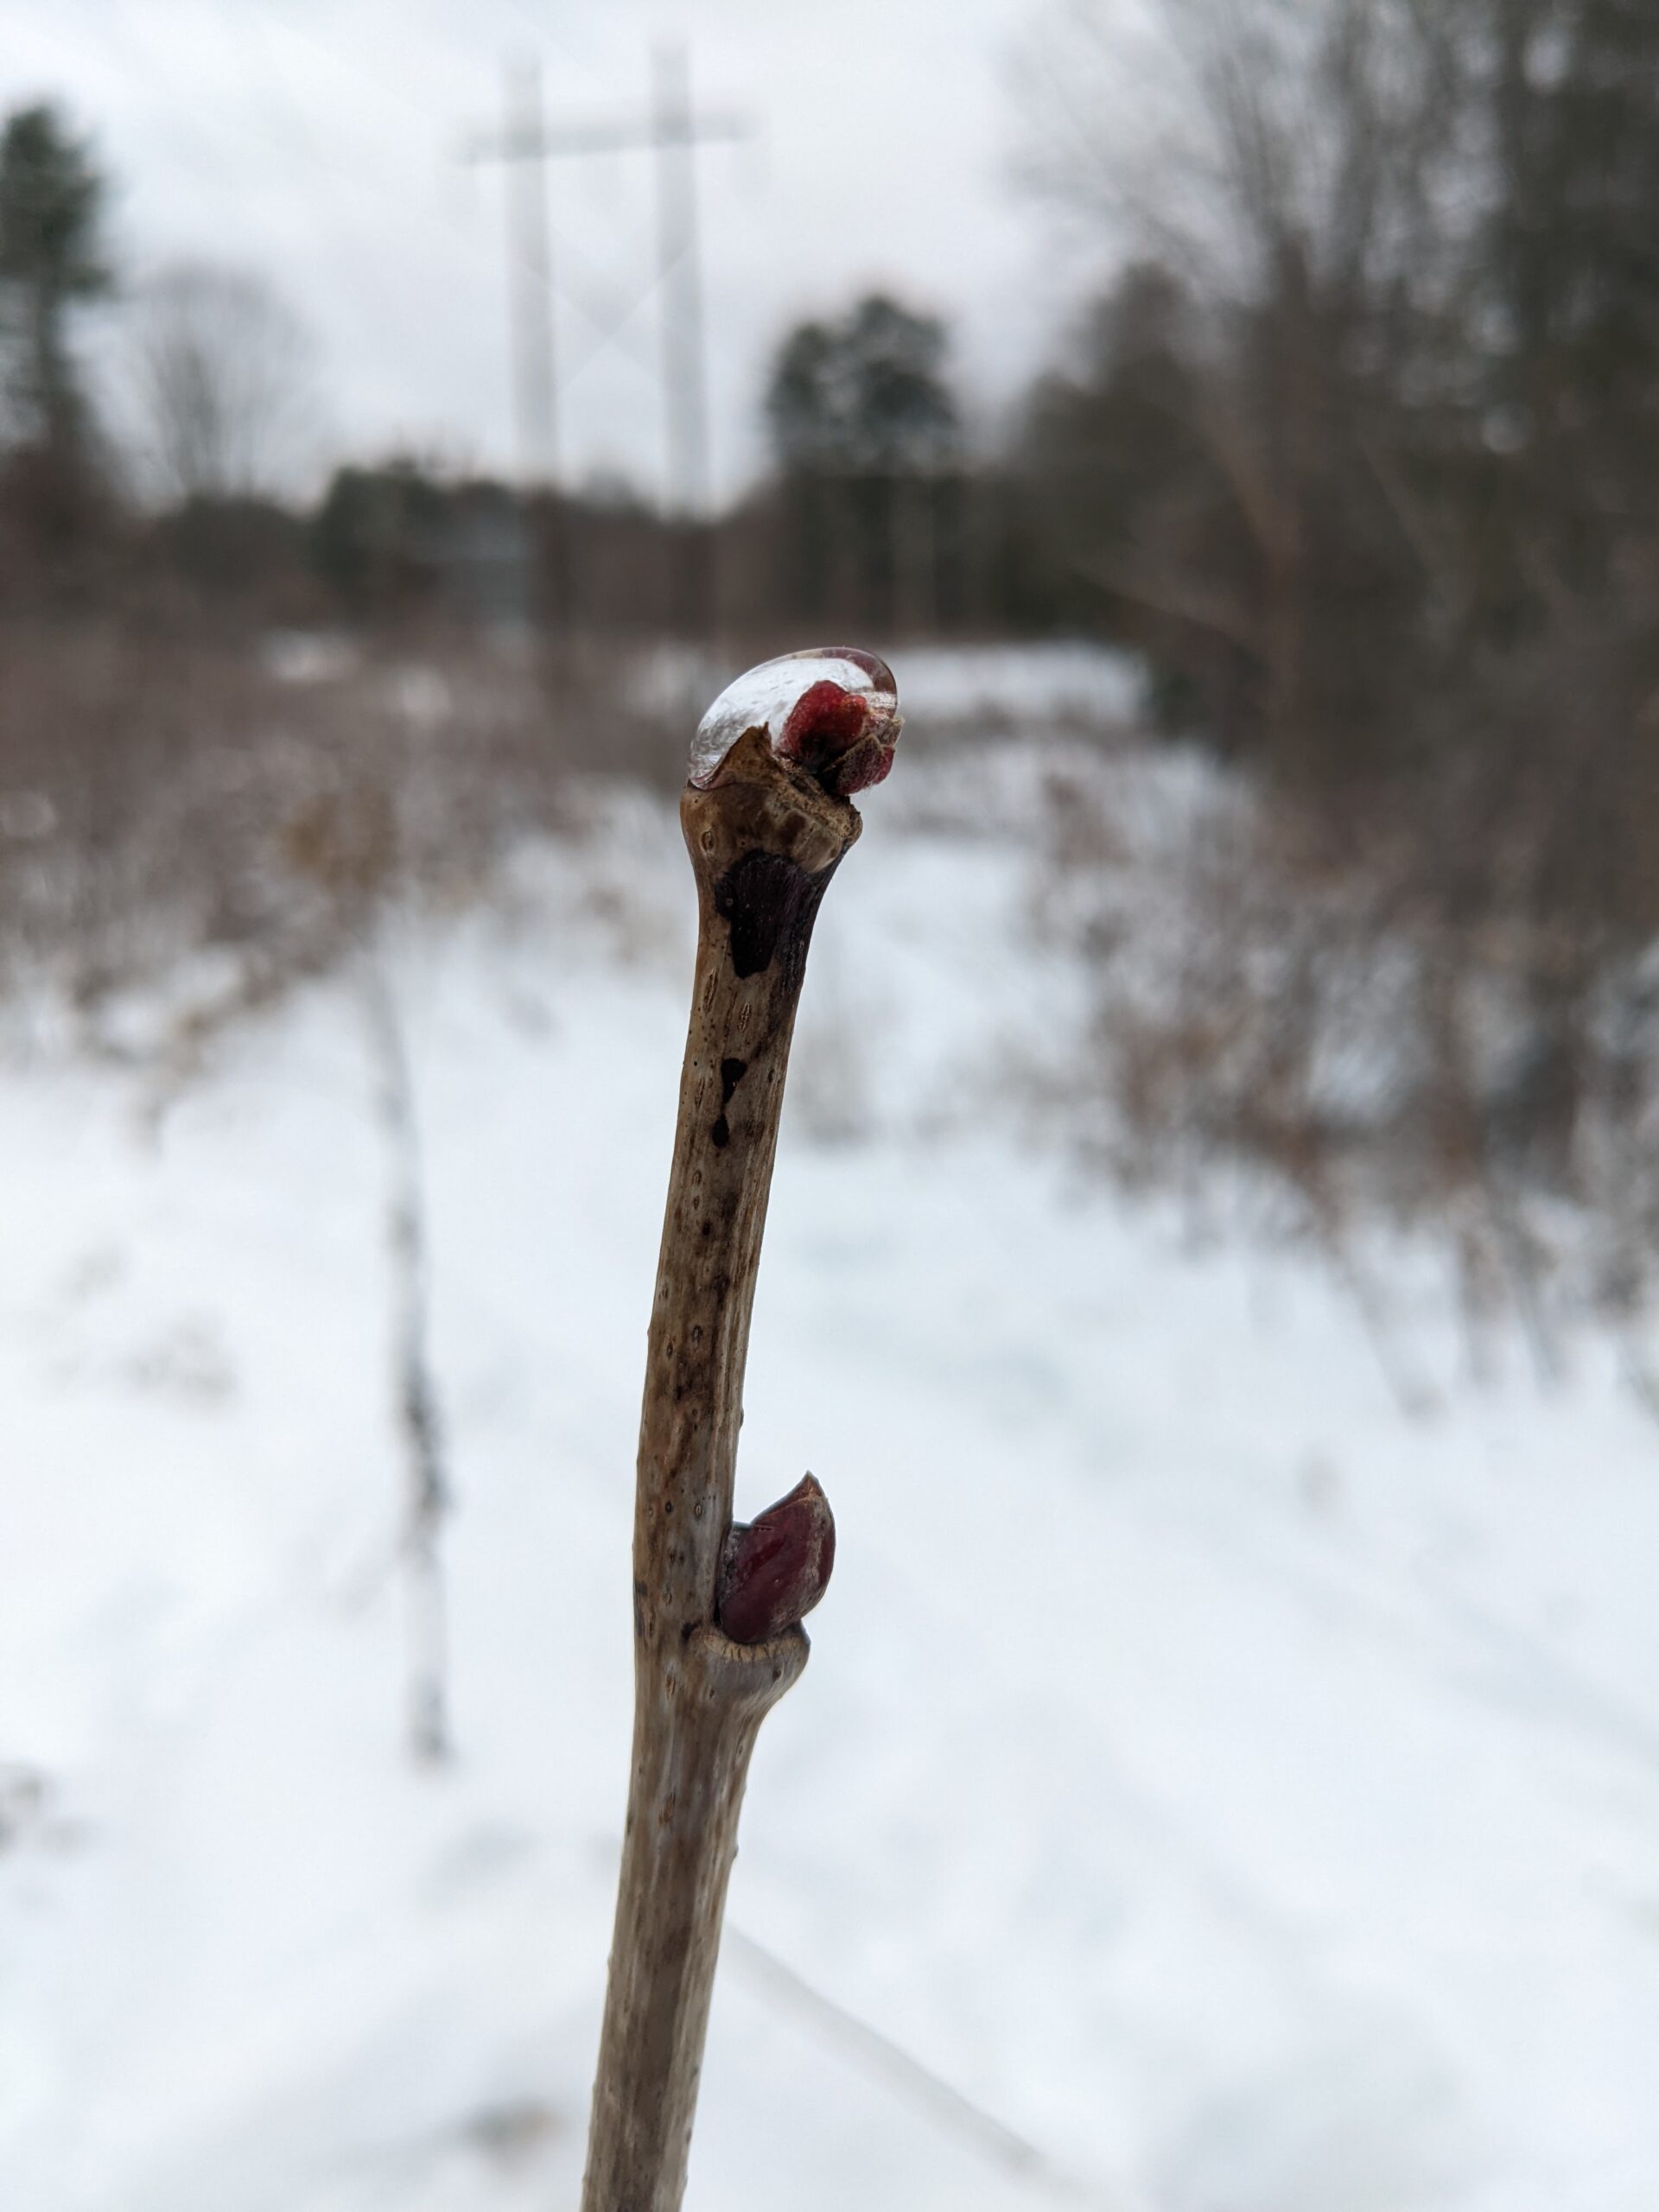 a twig with a bud encased in a drop of ice